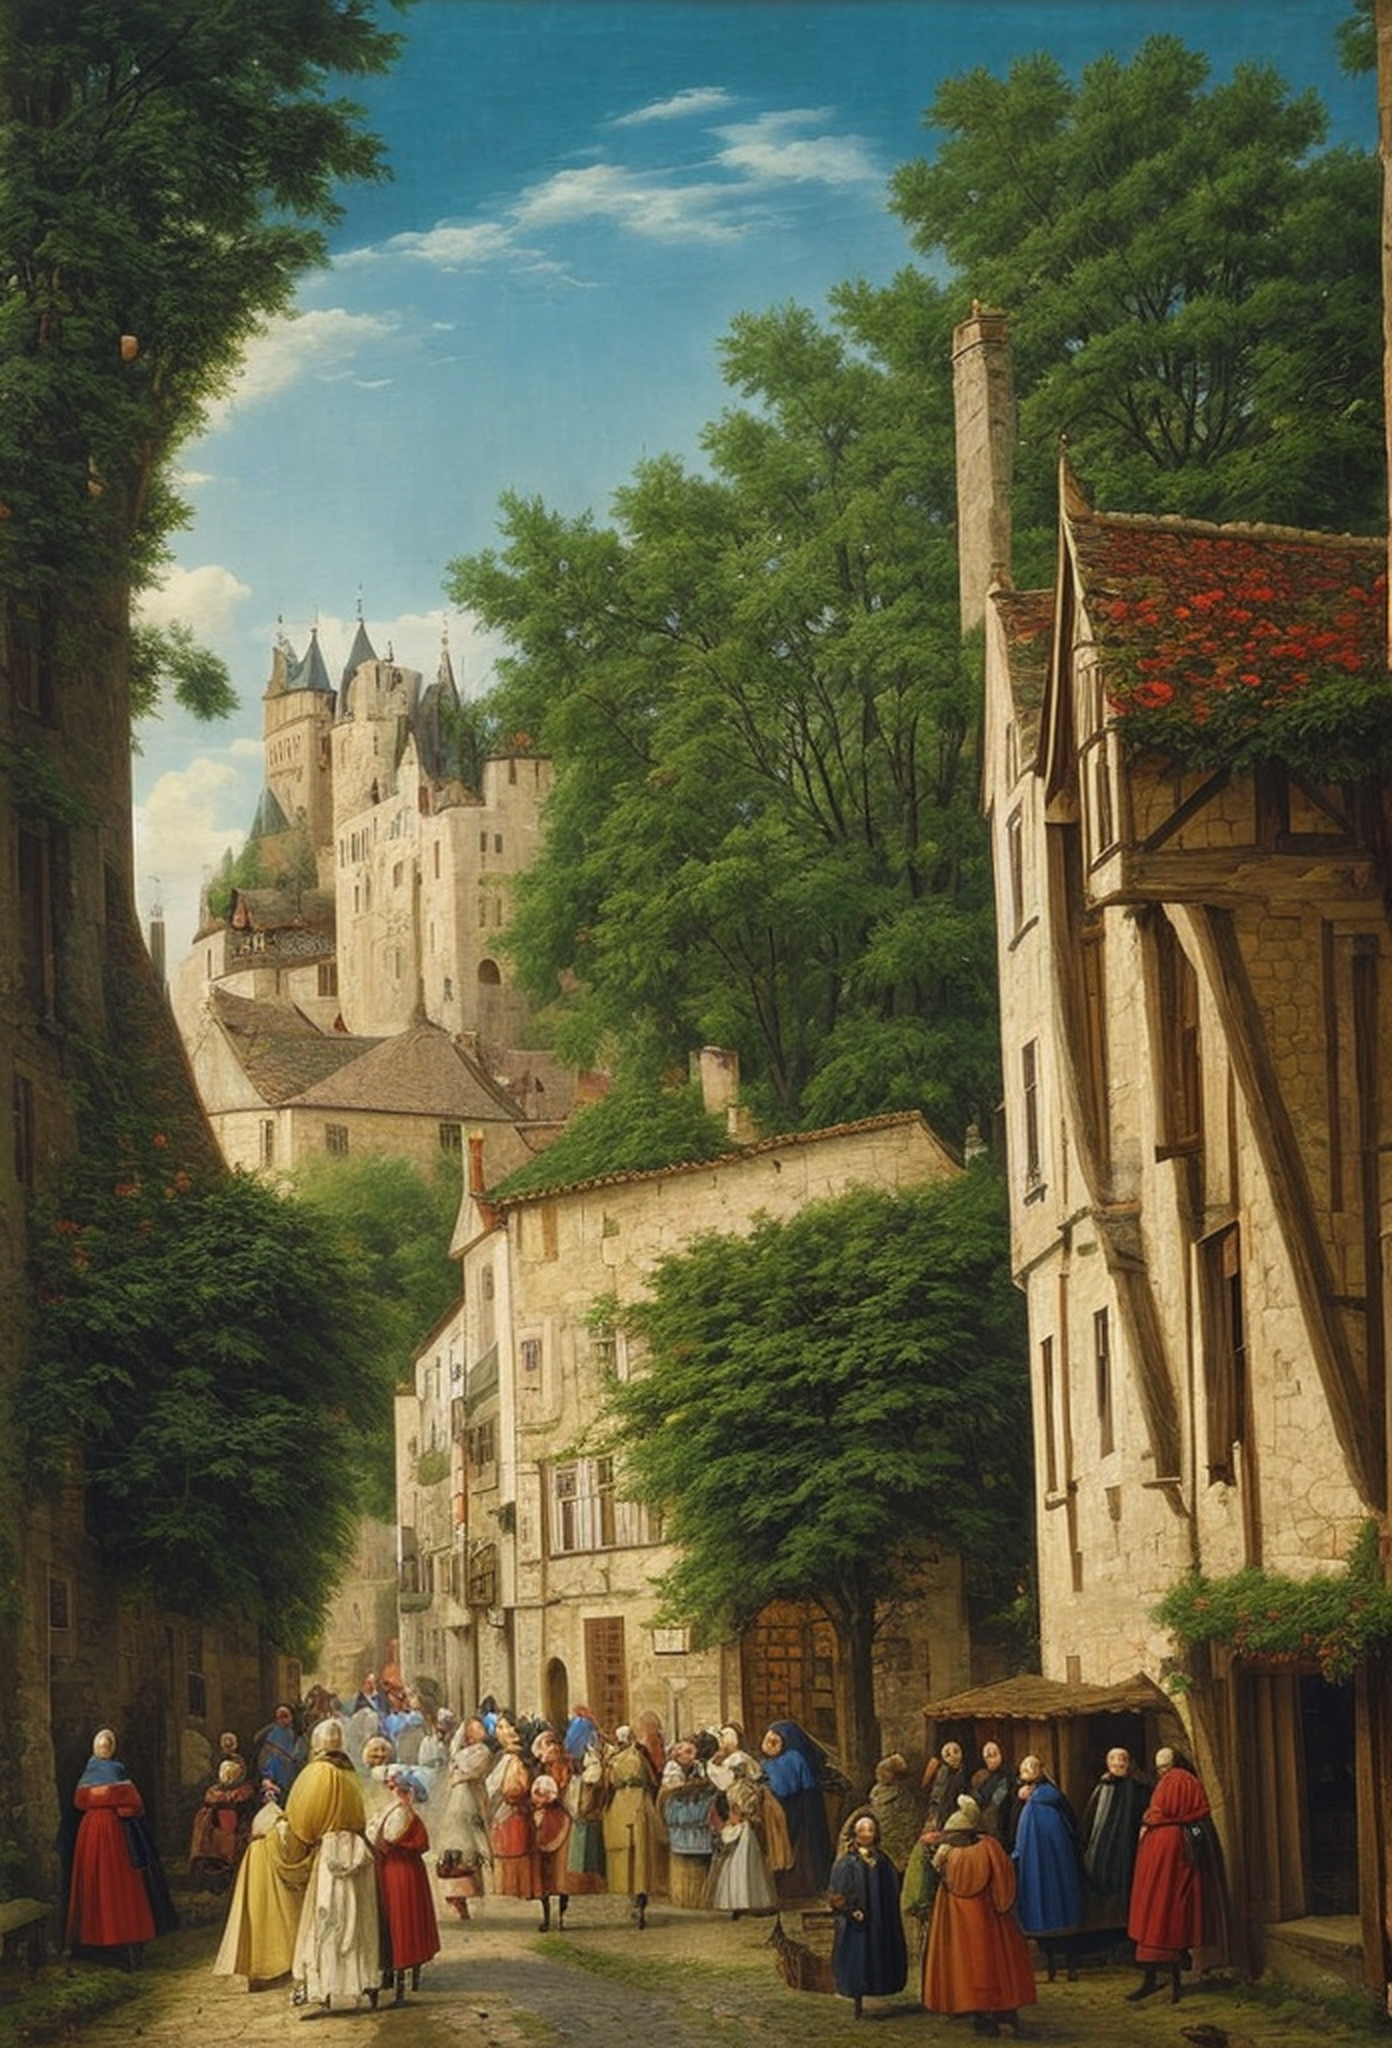 Medieval village scene with busy streets and castle in the distance